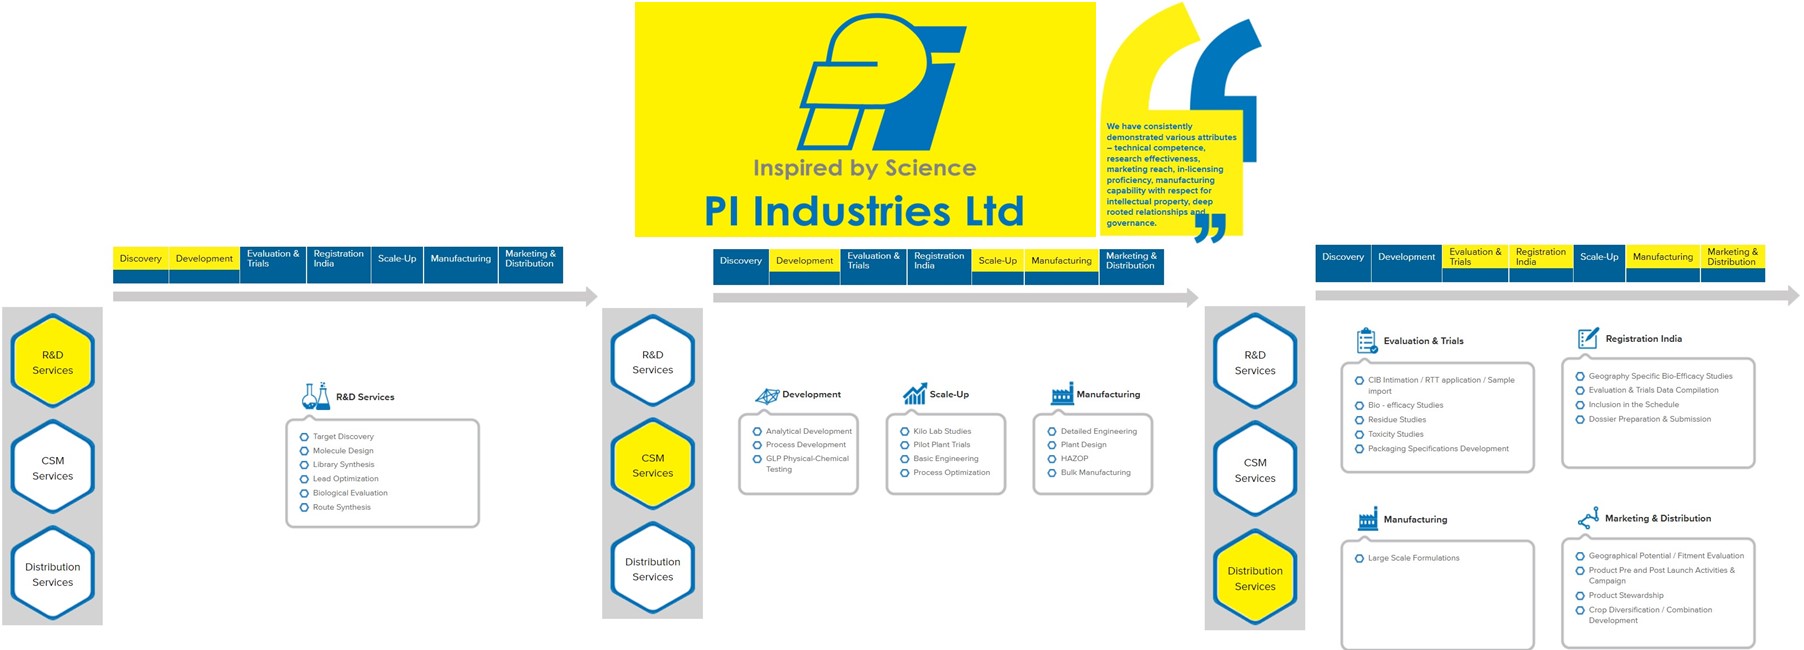 PI Industries Ltd - Riding On 20%+ Revenue Growth Momentum, Supported By Positive Market Scenario & Improved Visibility